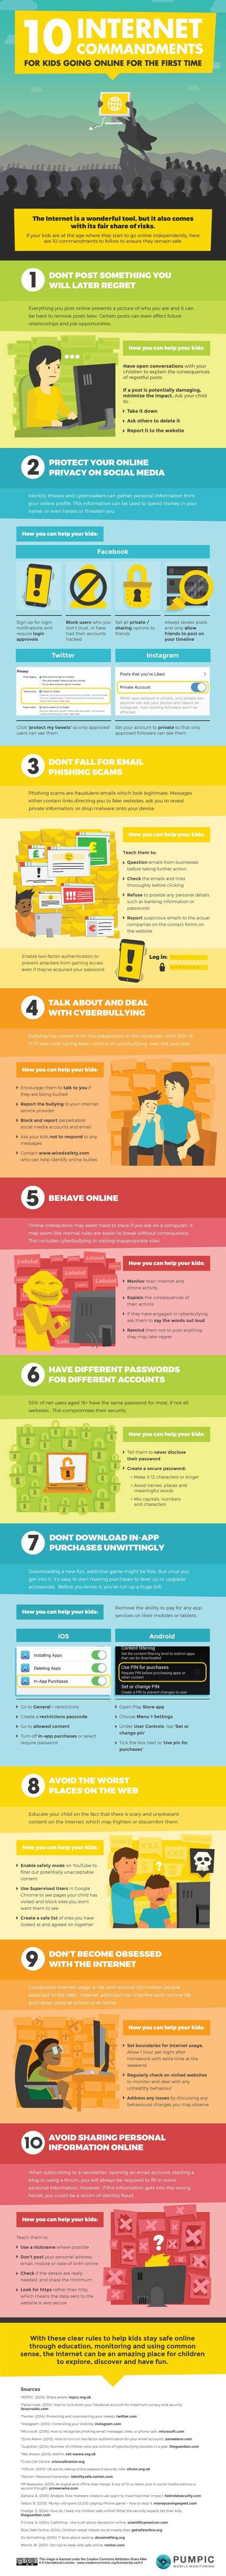 The 10 Best Internet Safety Rules for Everyone to Remember [Infographic] | Digital Delights - Digital Tribes | Scoop.it